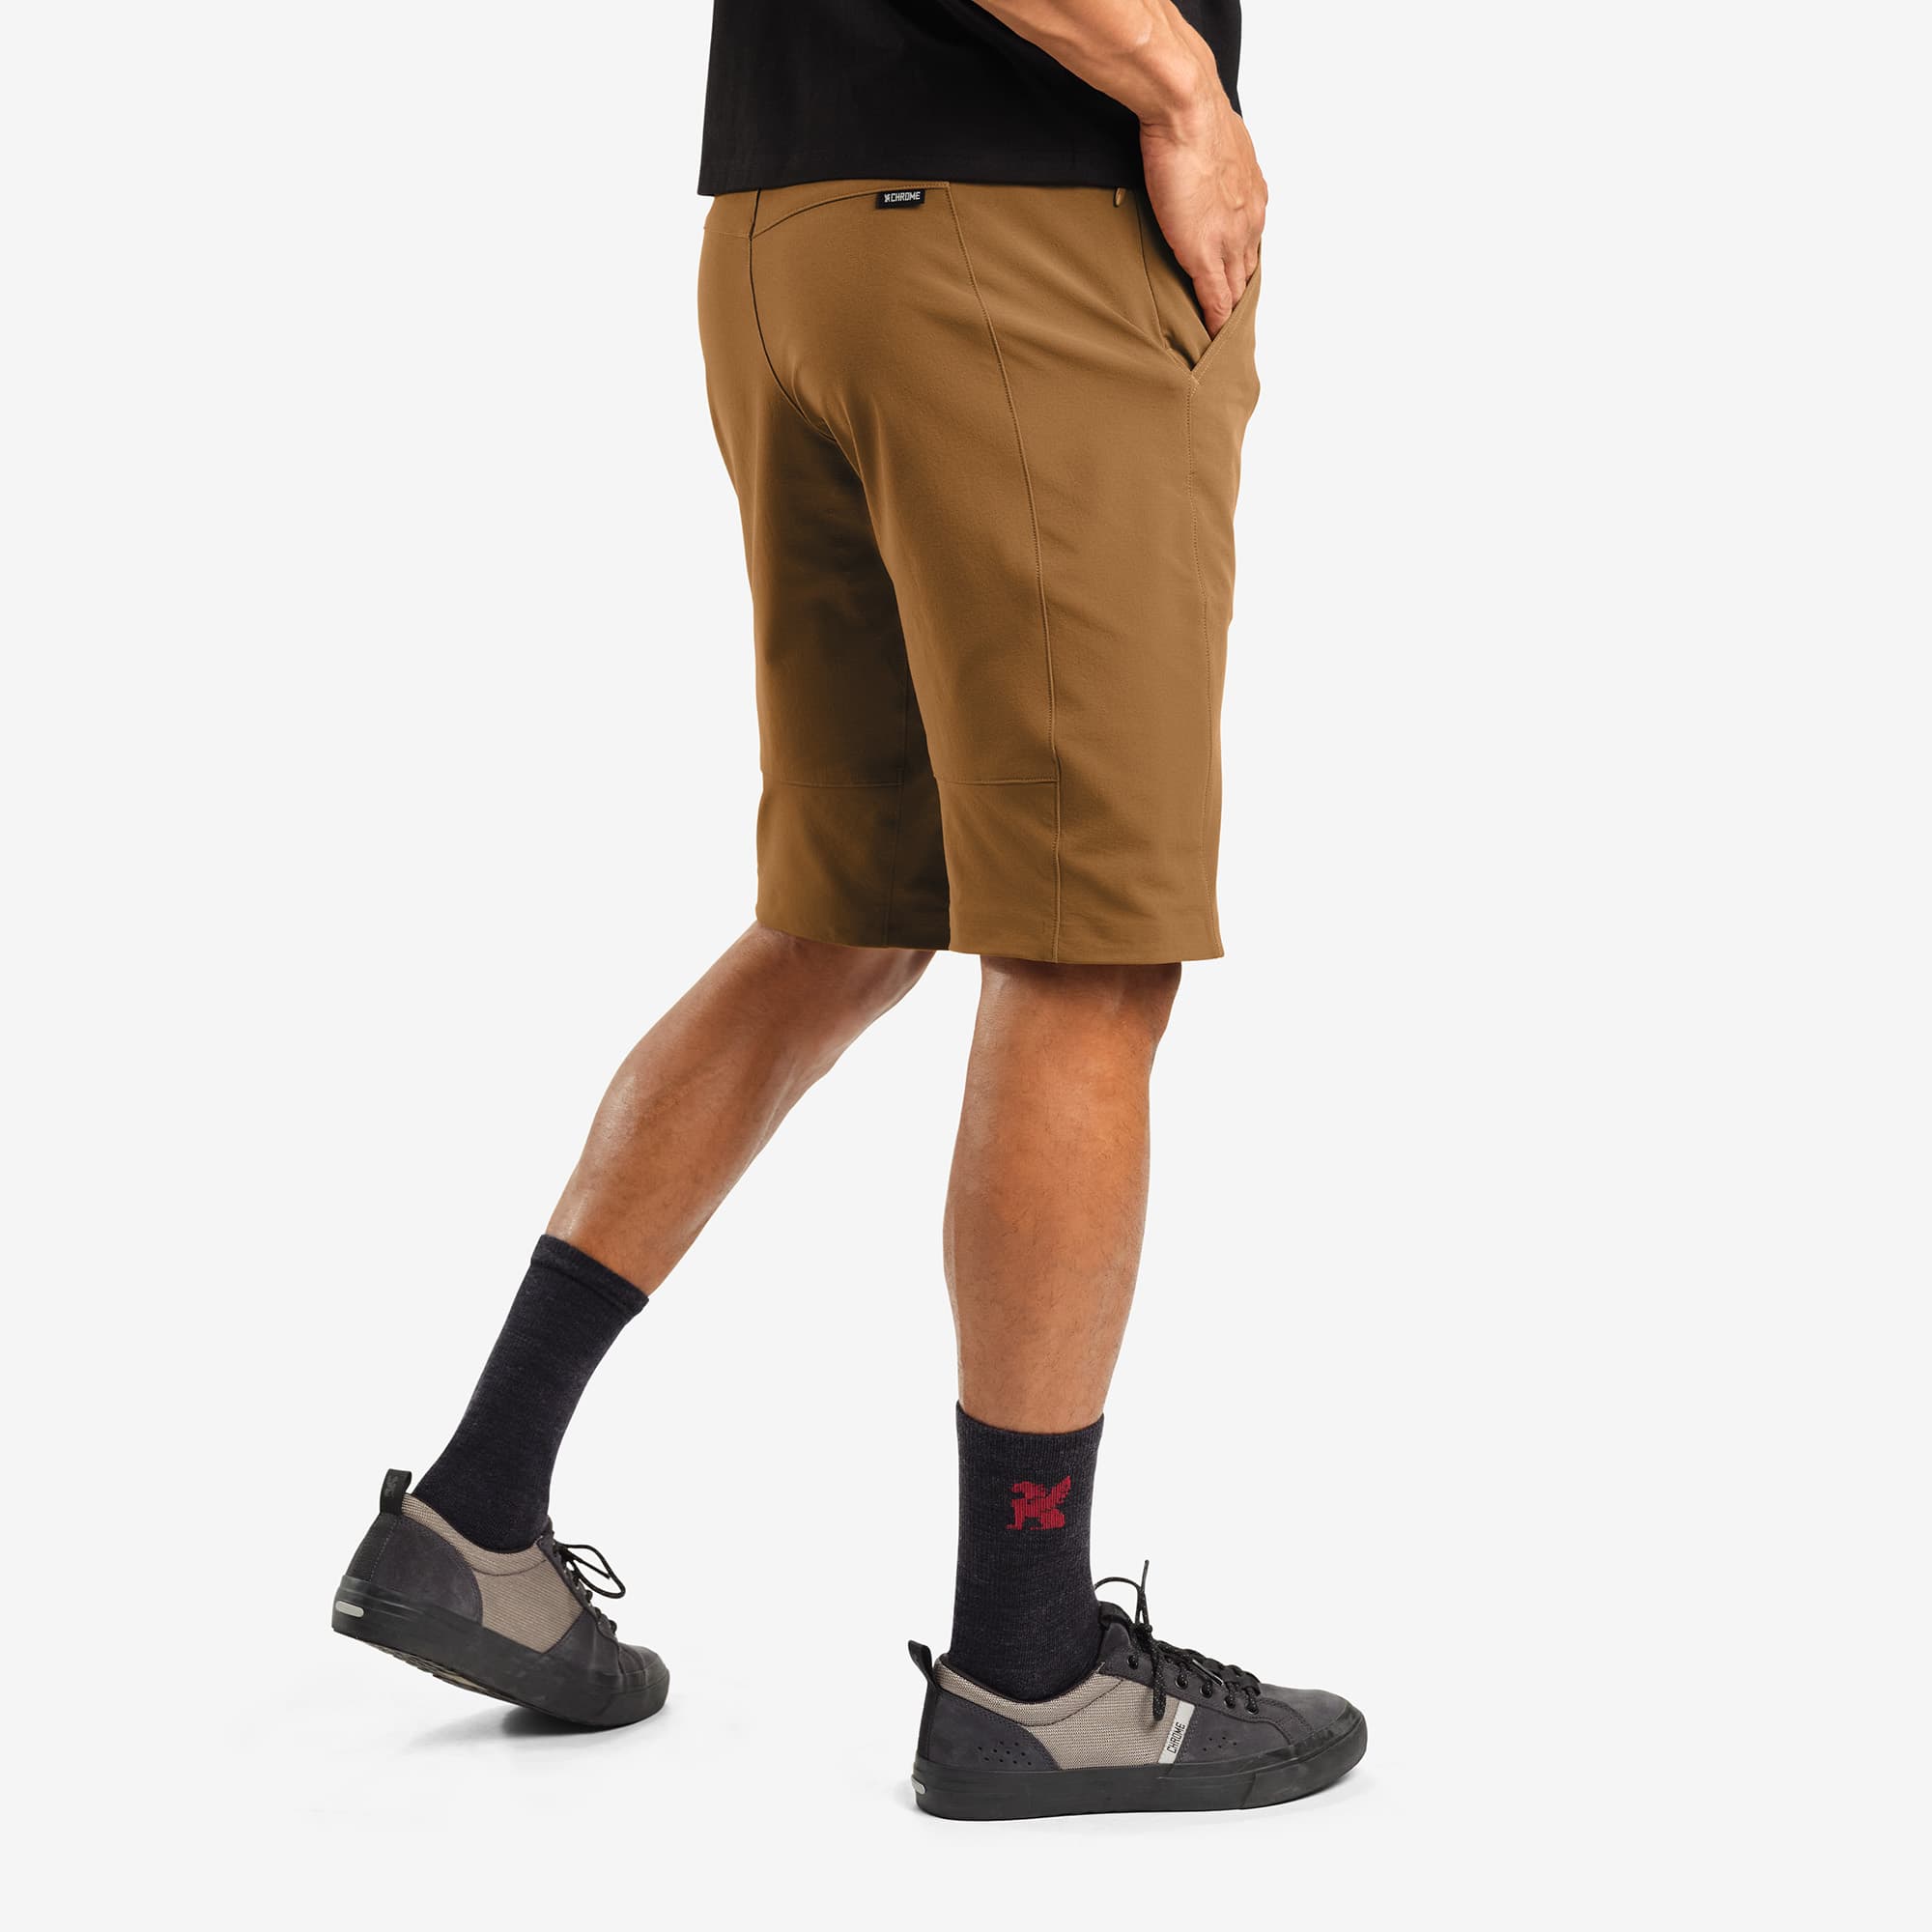 Men's tech Sutro Short in brown worn by a man side view #color_monks robe